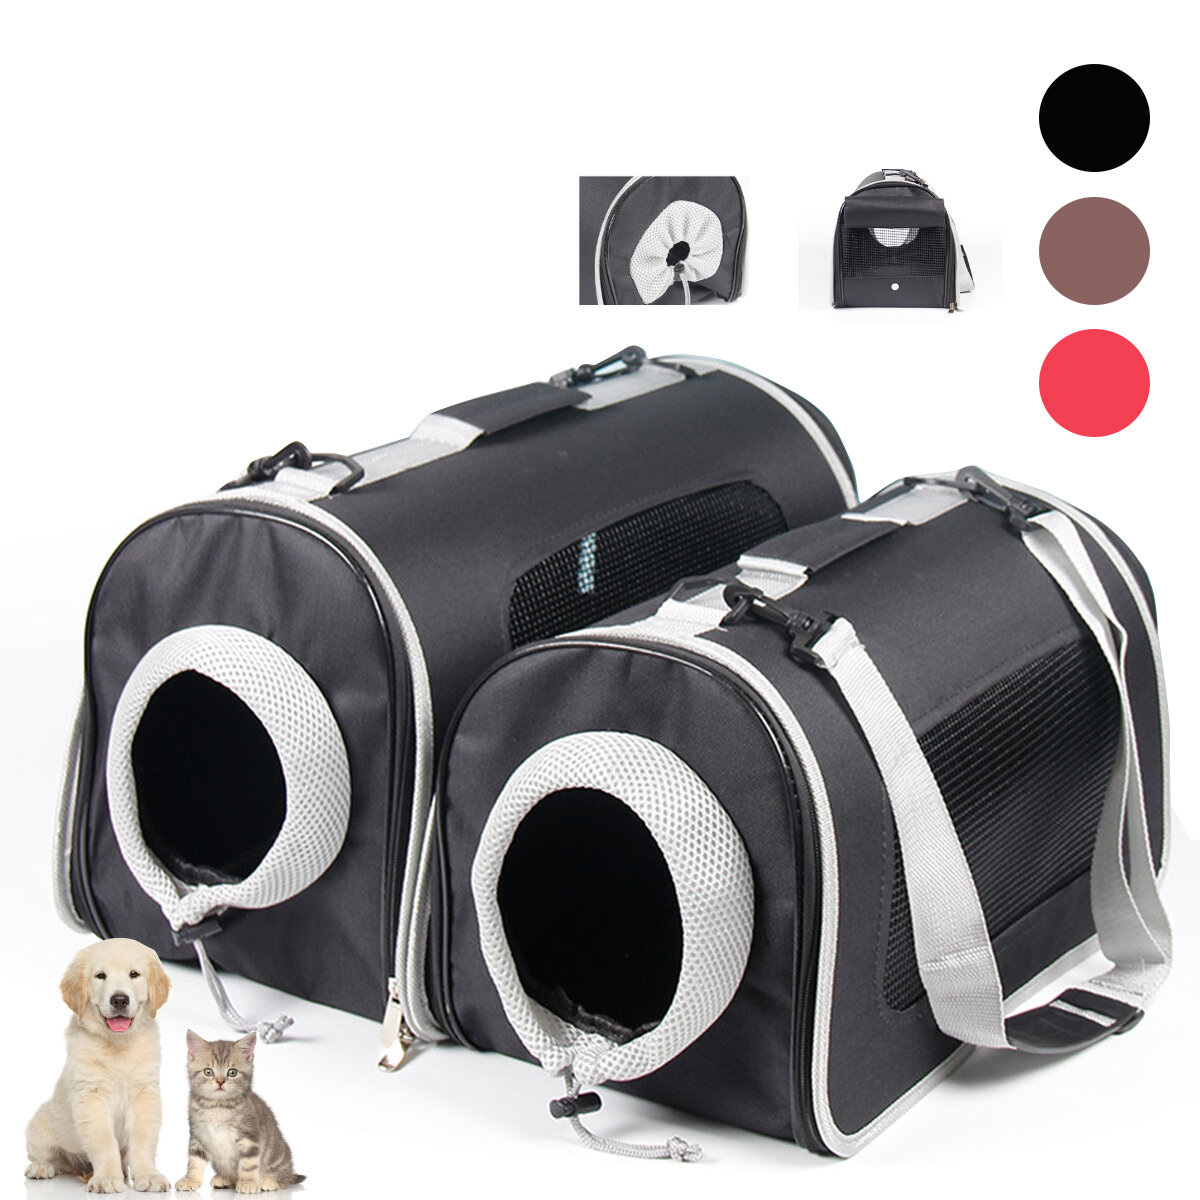 

Cat Pet Carrier Bag Portable Pet Backpack Mesh Breathable Puppy Travel Bags for Outdoor Activities Dog Bags